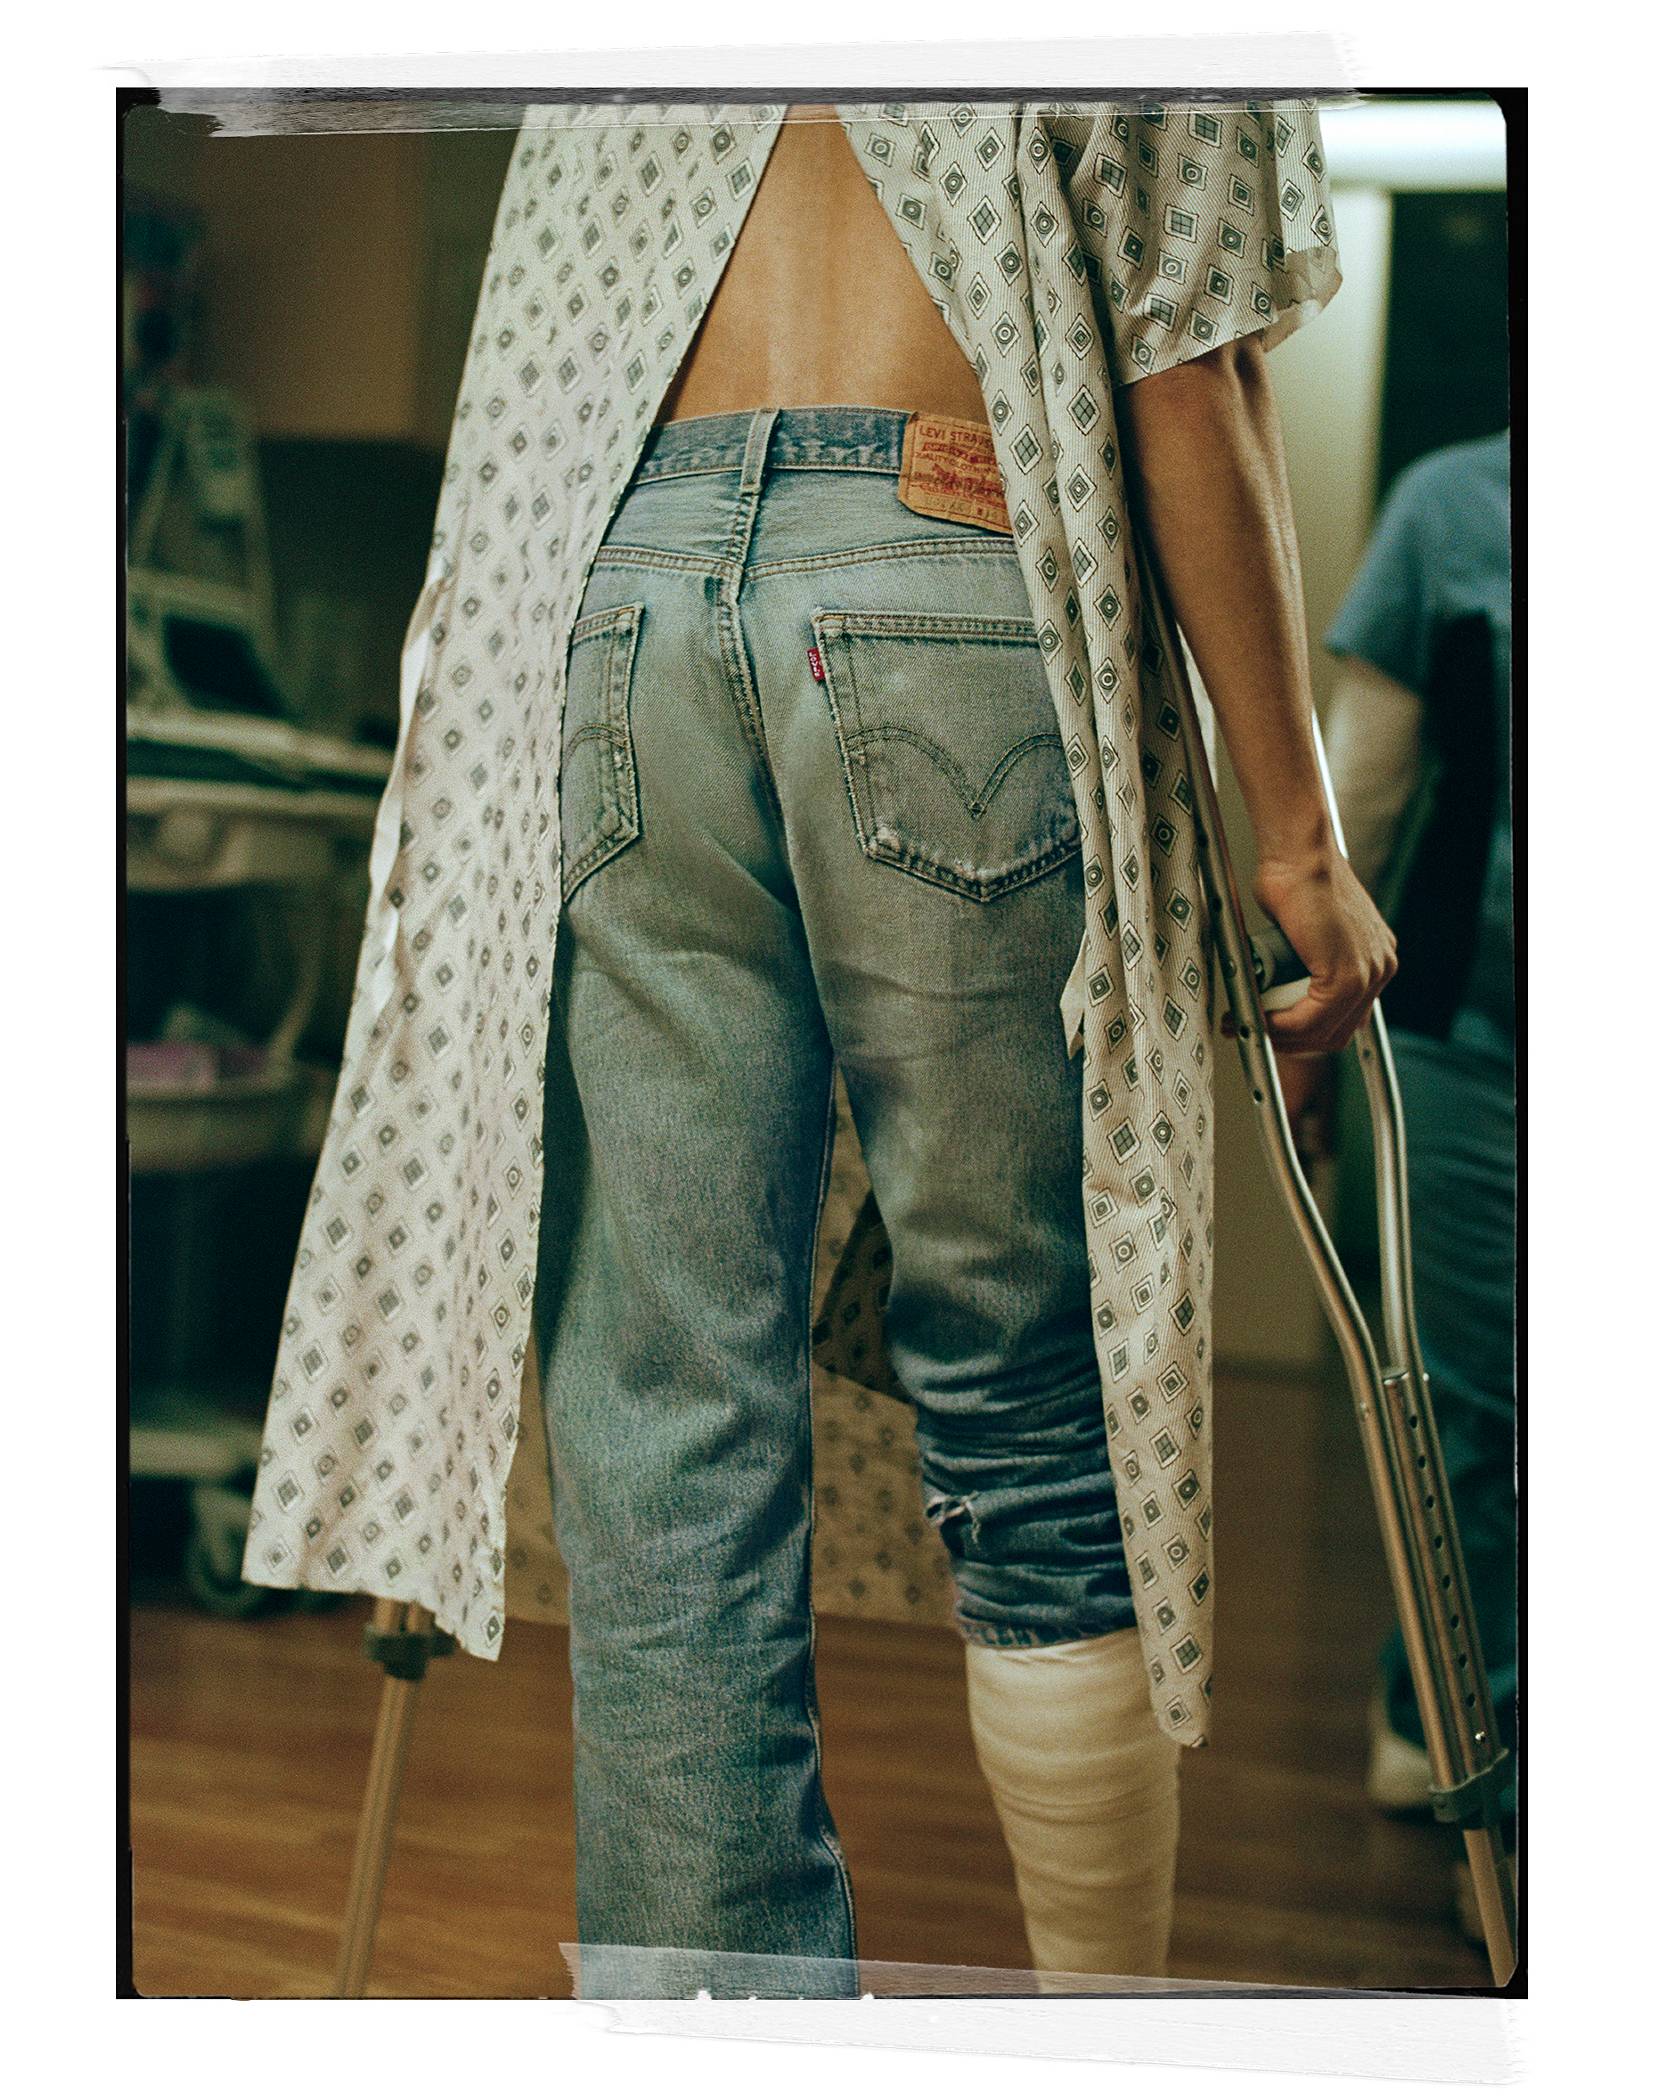 Person wearing Levi's jeans with a hospital gown on, cast on a foot while walking with crutches.